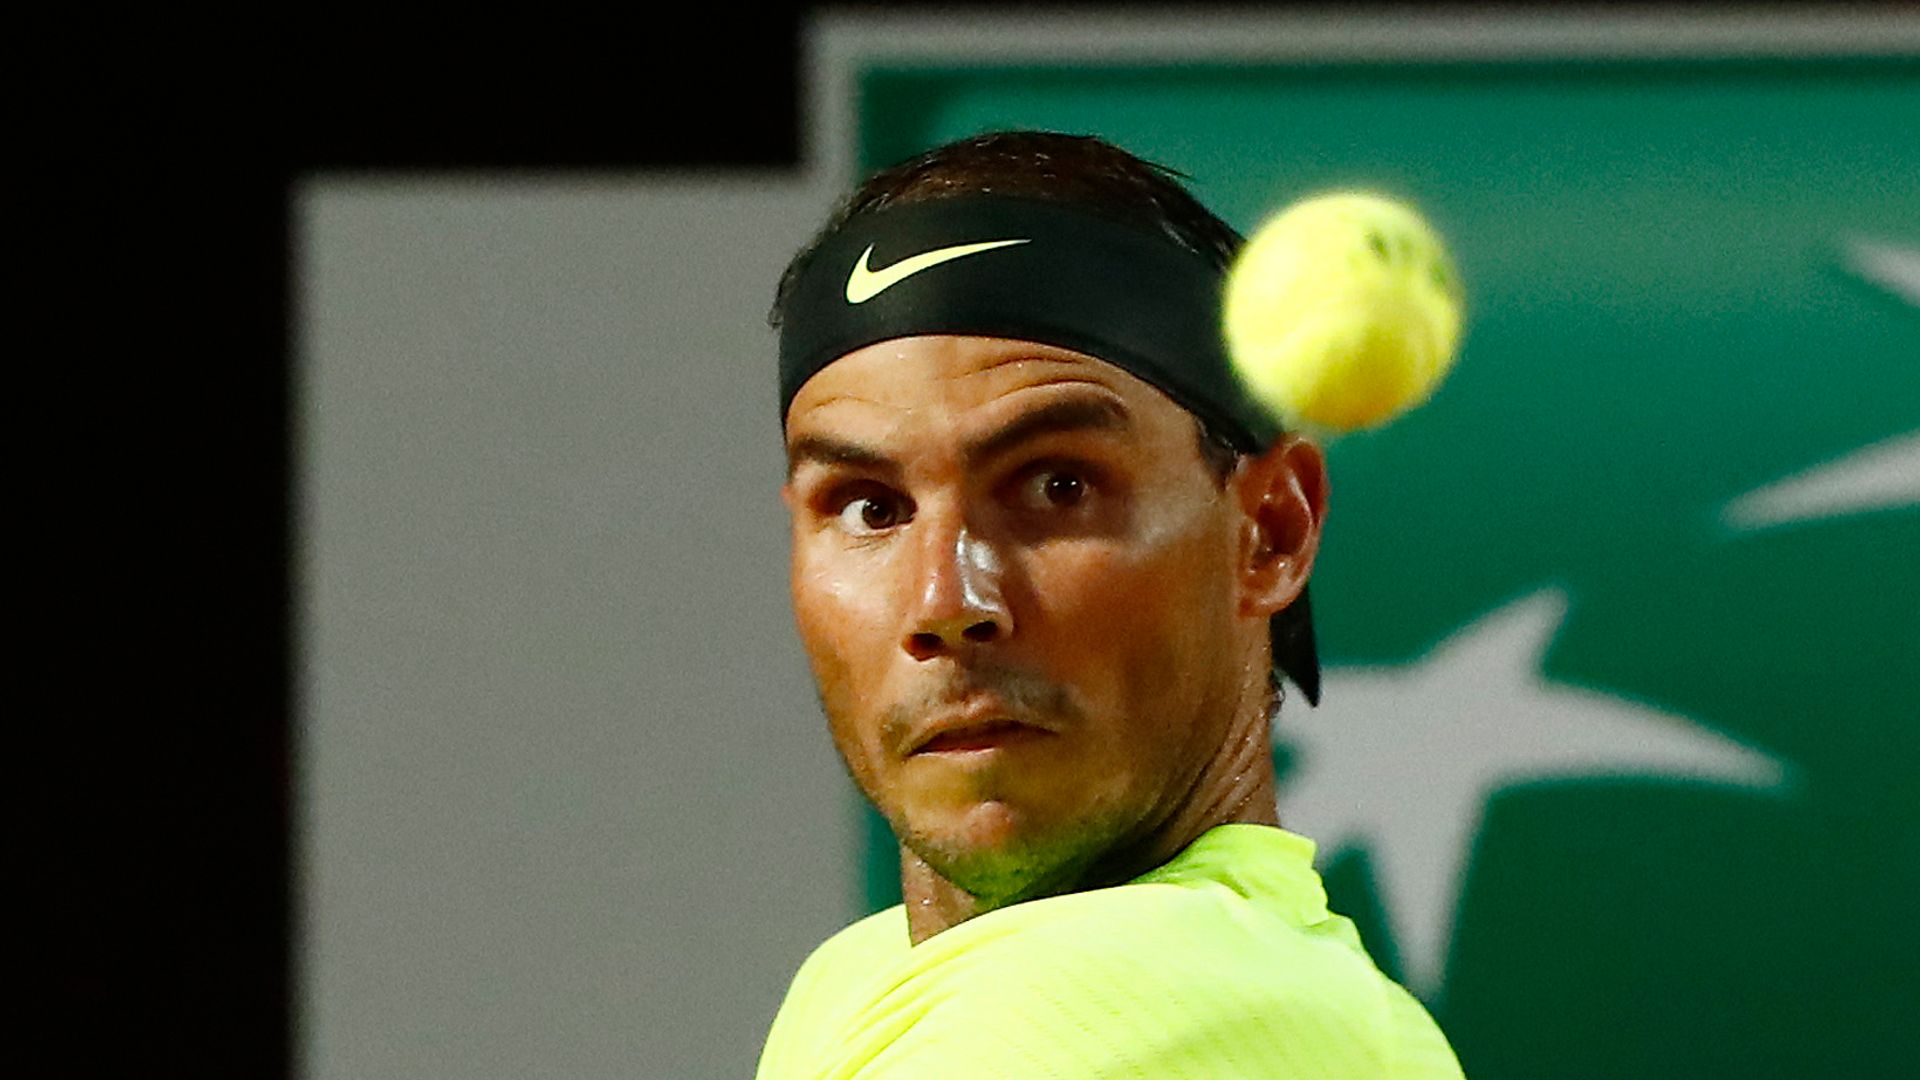 Nadal out of Italian Open